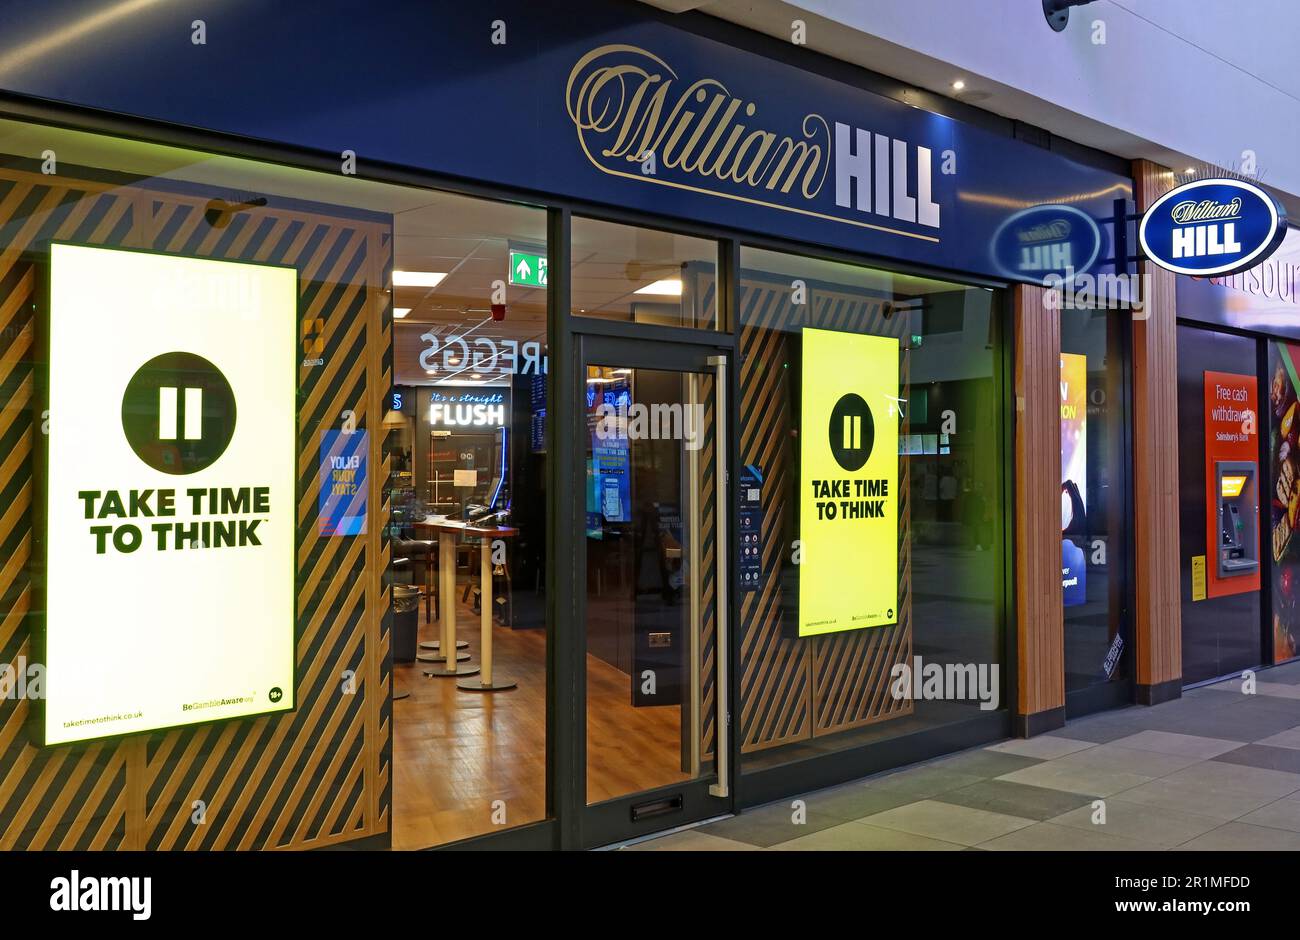 William Hill betting shop, Unit 7, Ranelagh St, Central Station, Liverpool, Merseyside, England, UK,  L1 1JT Stock Photo